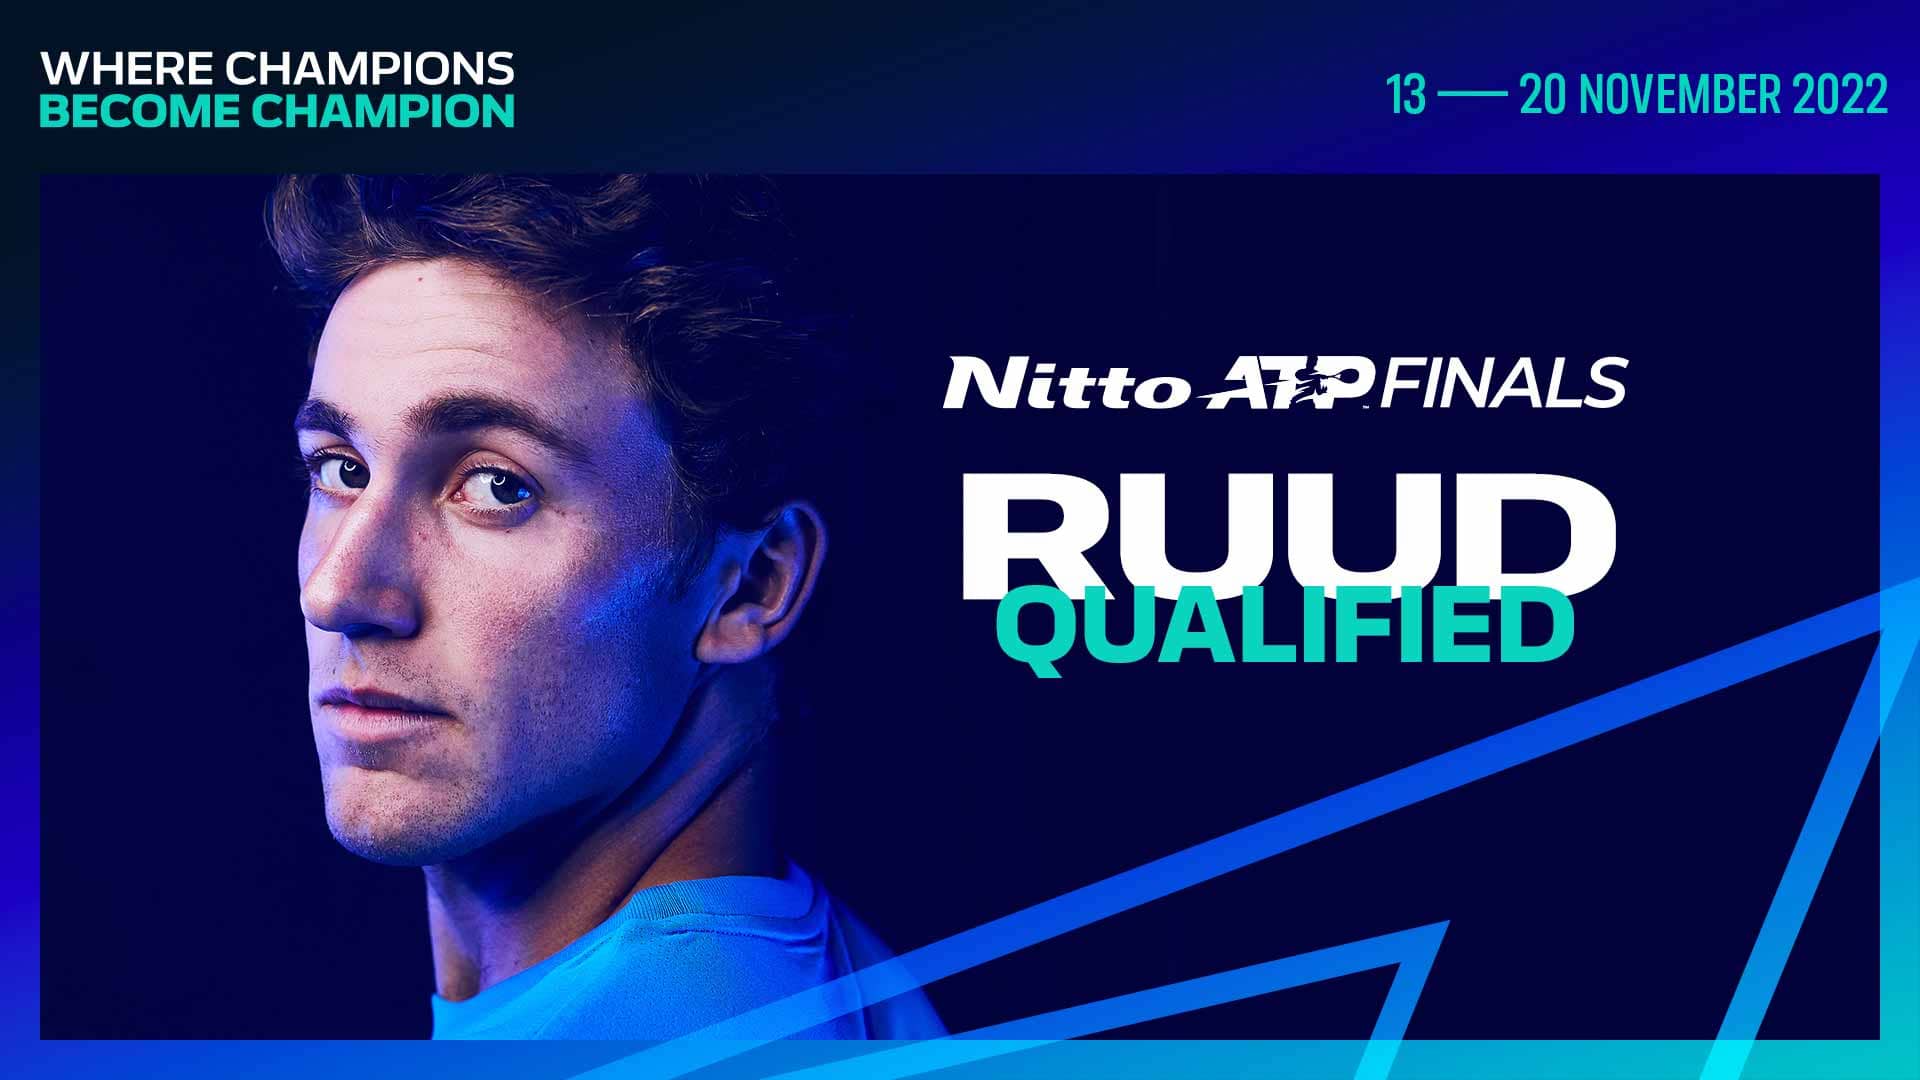 Ruud Qualifies For Nitto ATP Finals For Second Consecutive Year